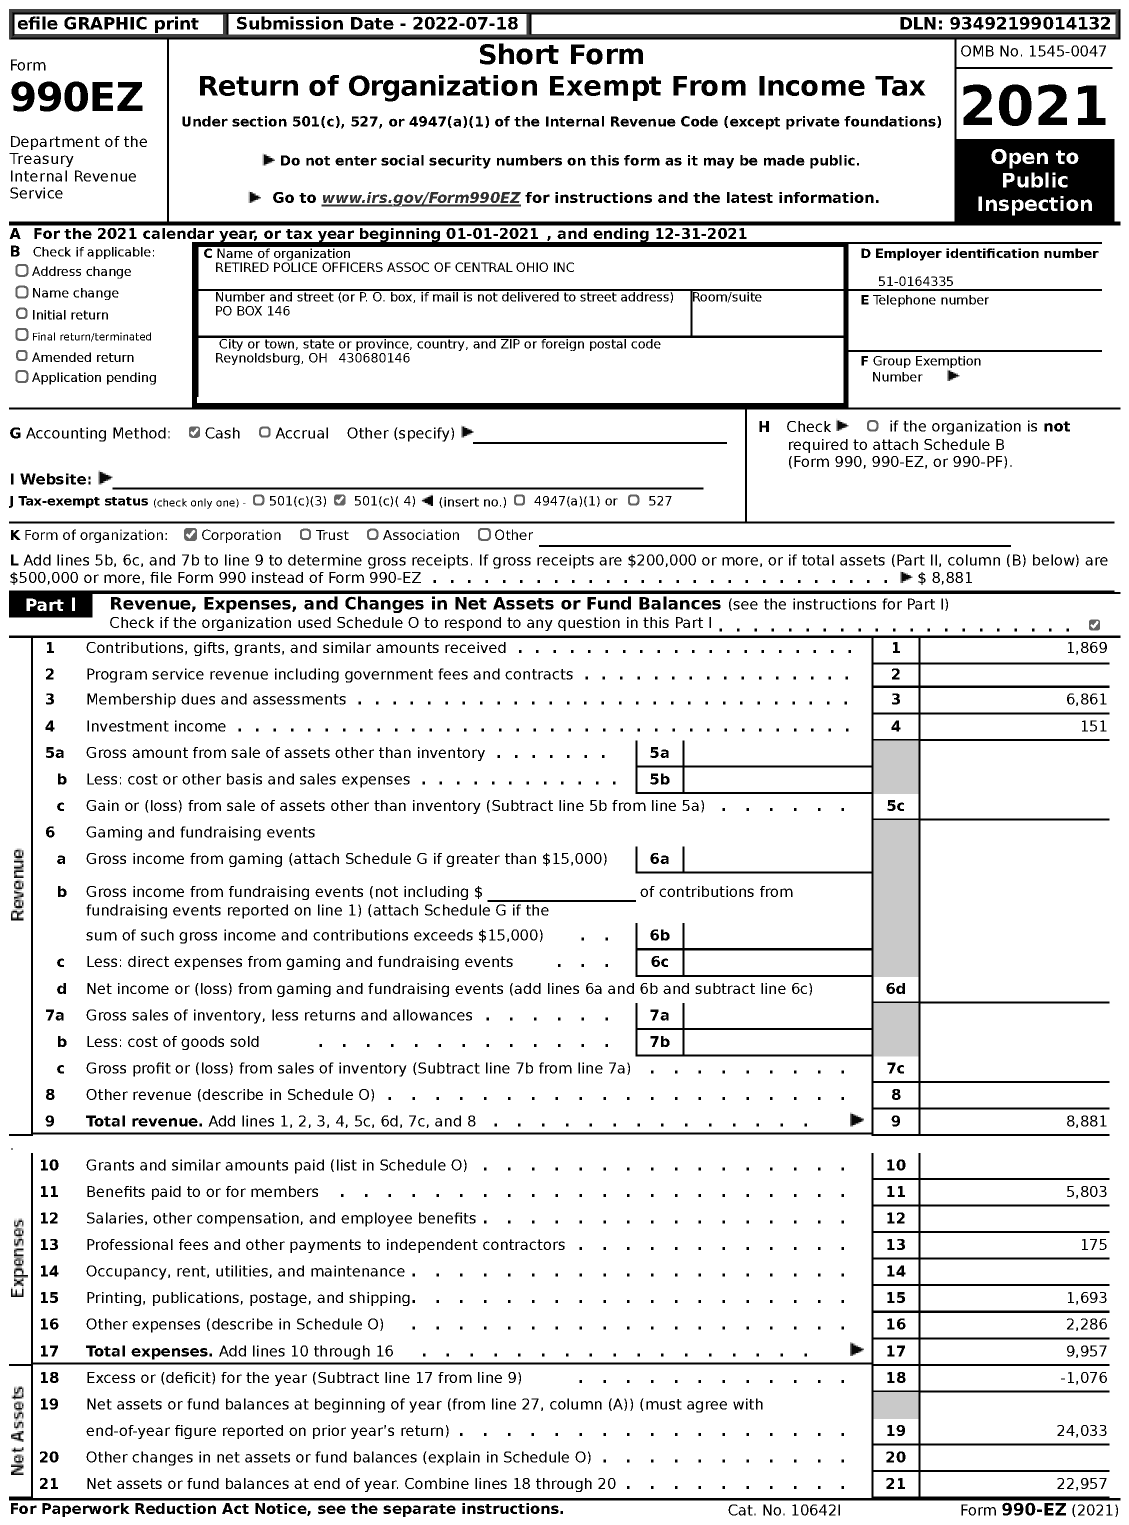 Image of first page of 2021 Form 990EZ for Retired Police Officers Association of Central Ohio